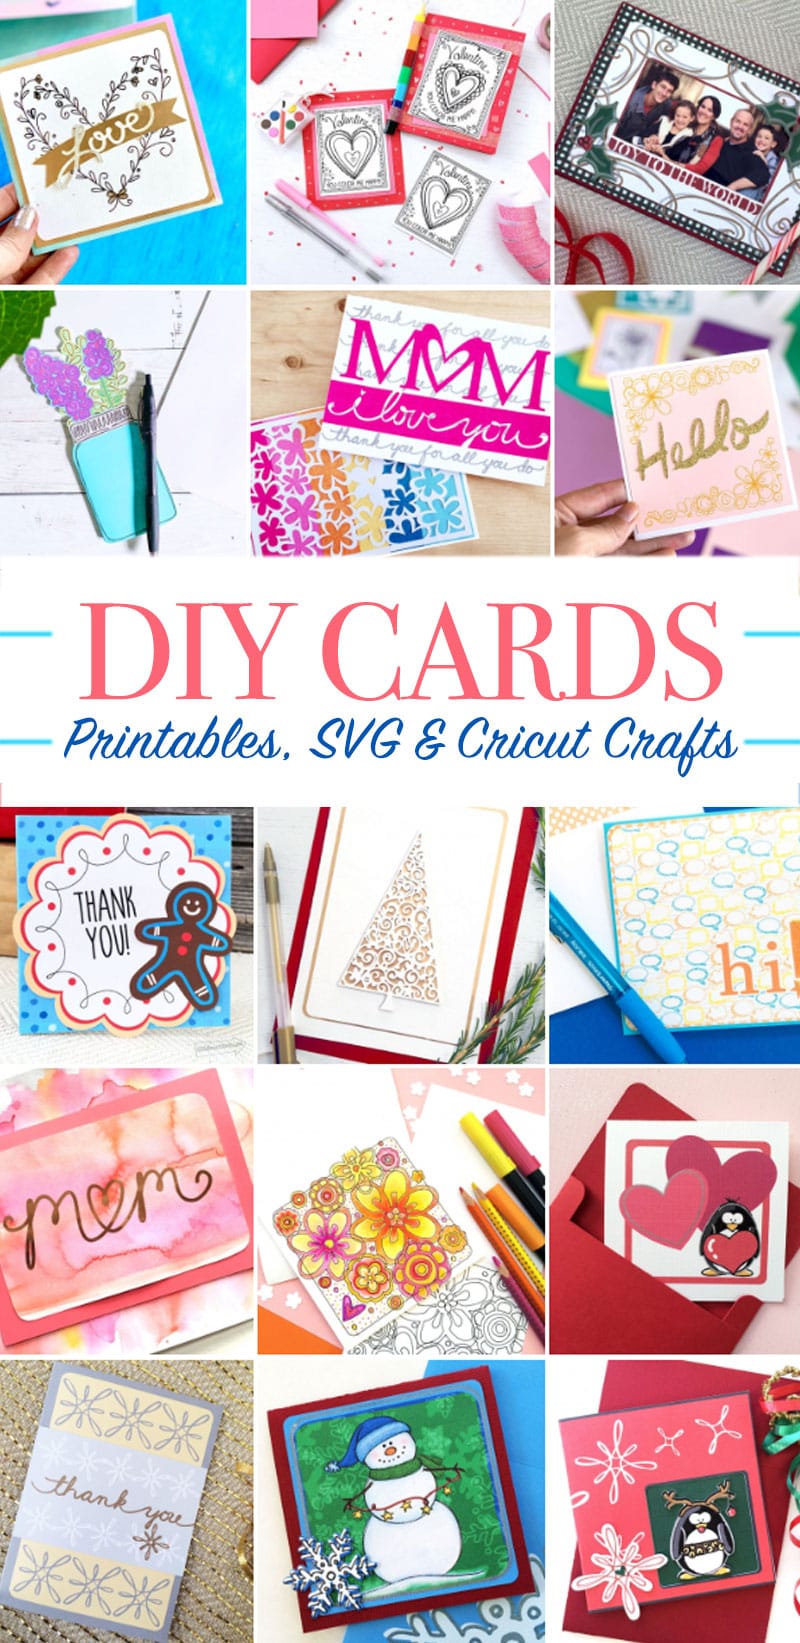 make your own handmade cards